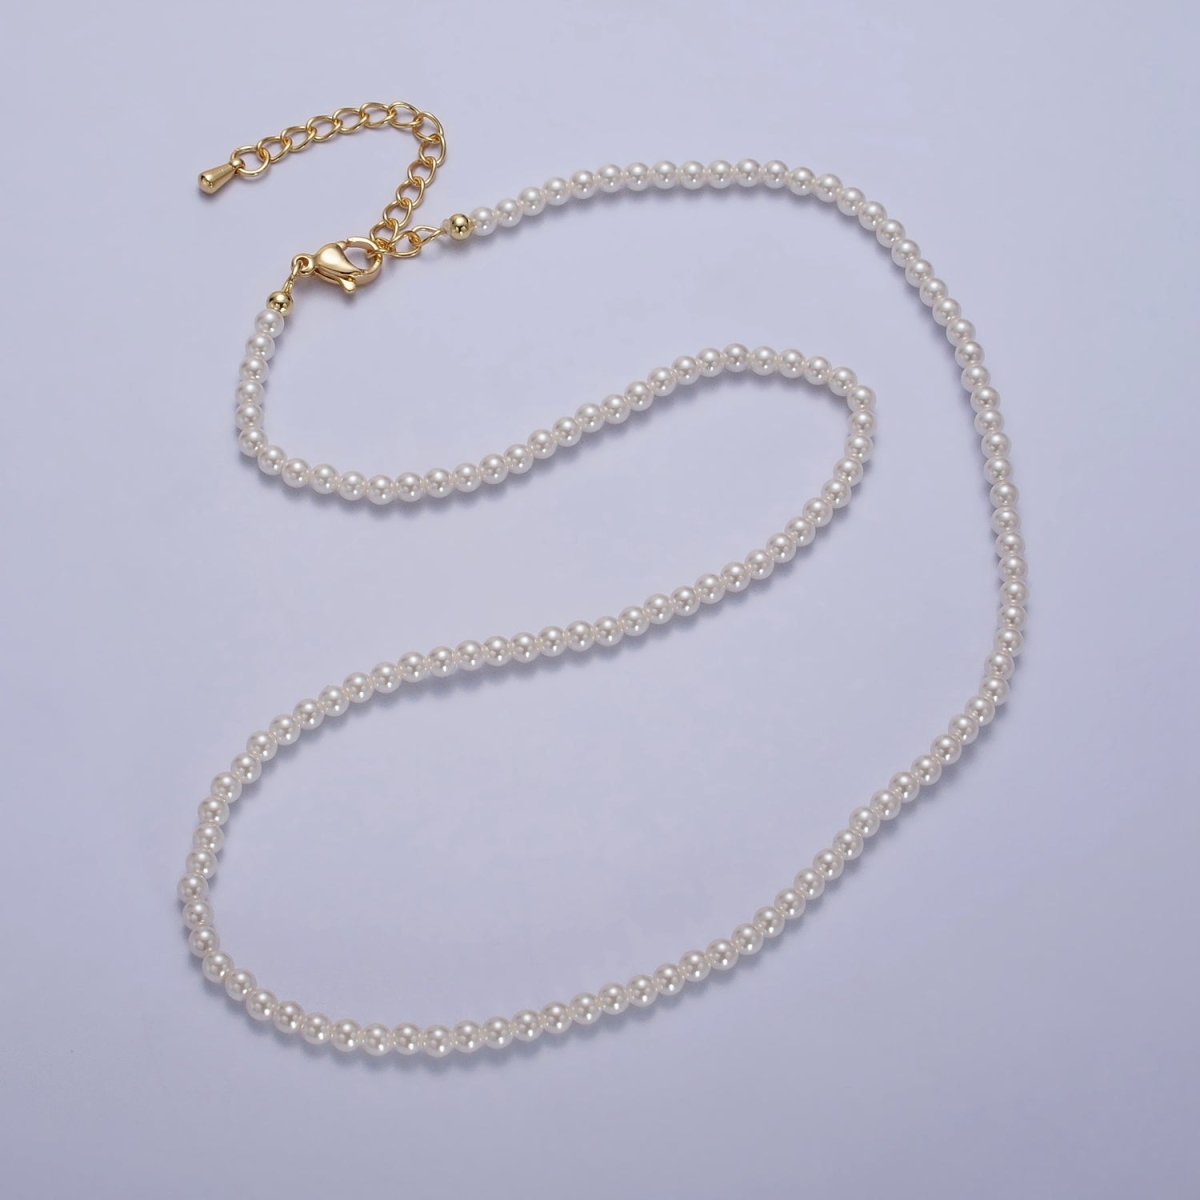 24k Gold Filled Classic Pearl Necklace 16.5 inch Bridal Necklace with Adjustable 2" Extender Chain | WA-1558 Clearance Pricing - DLUXCA